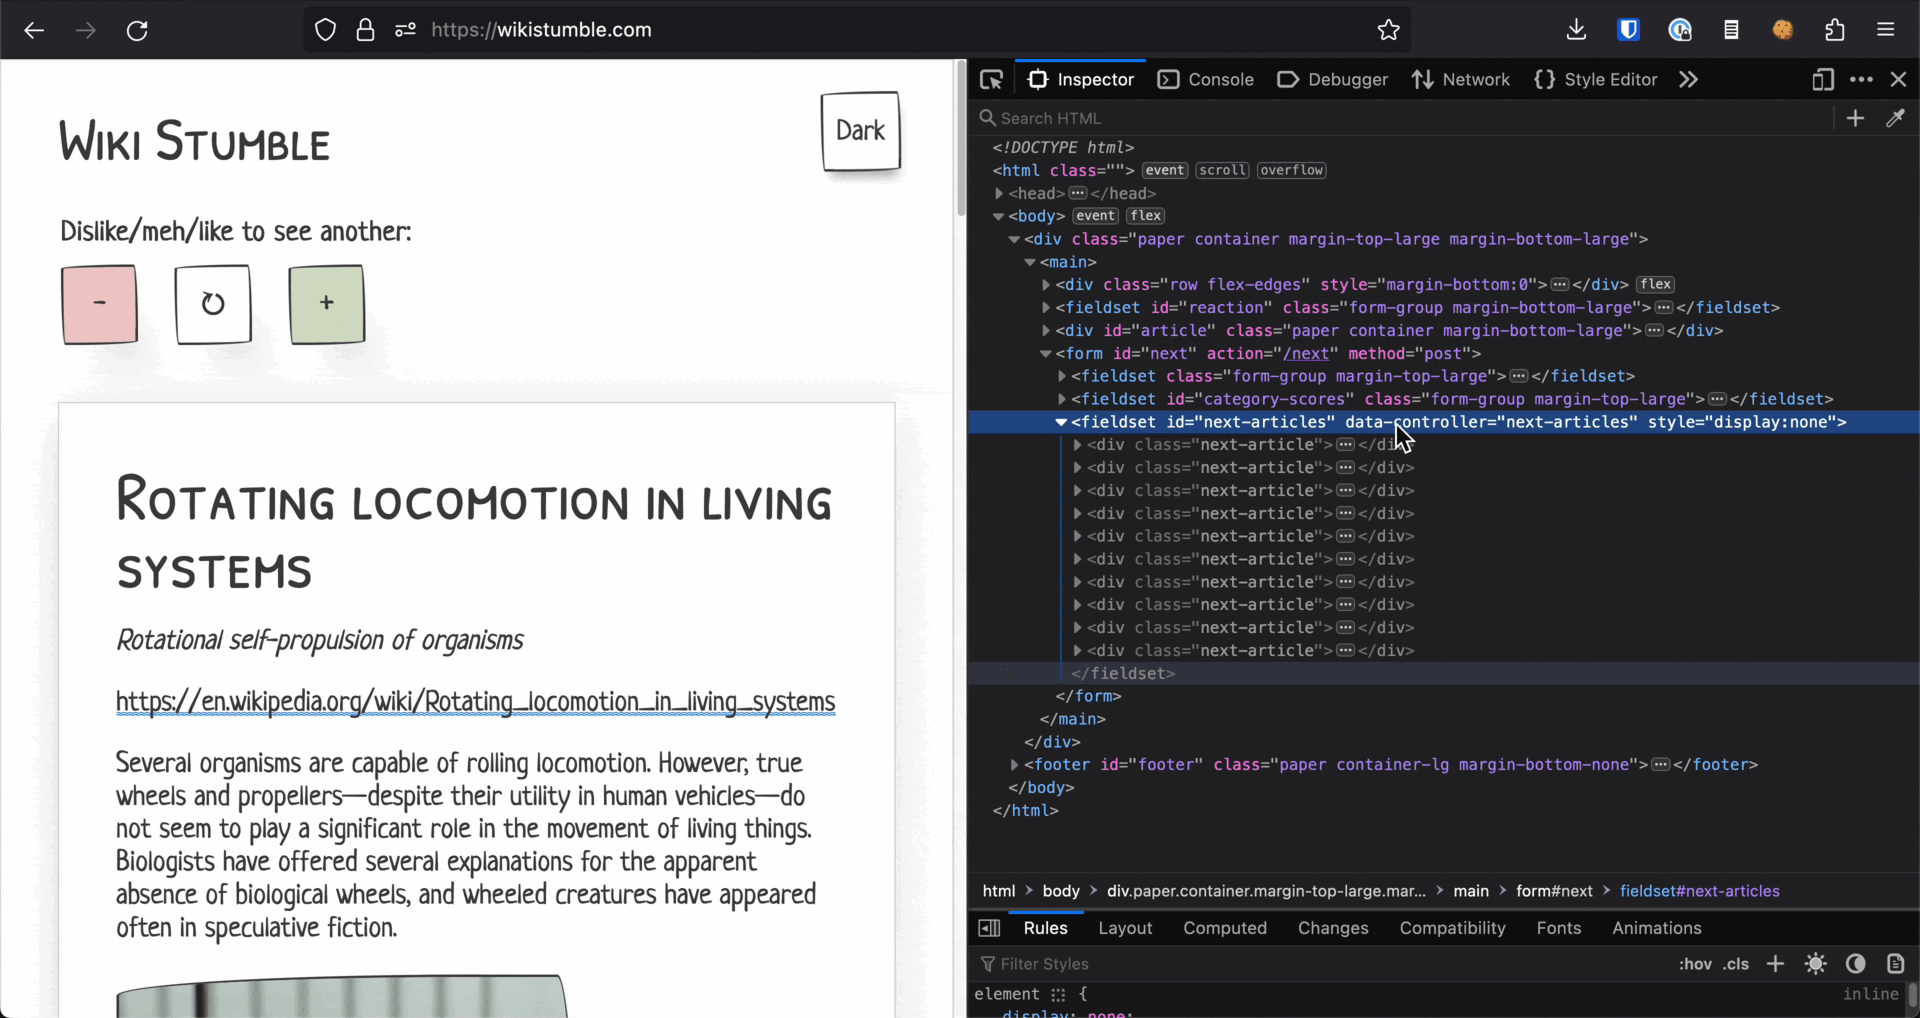 A demo of Wiki Stumble, with the browser's DOM inspector open showing the hidden fields of the article buffer being asynchronously filled.